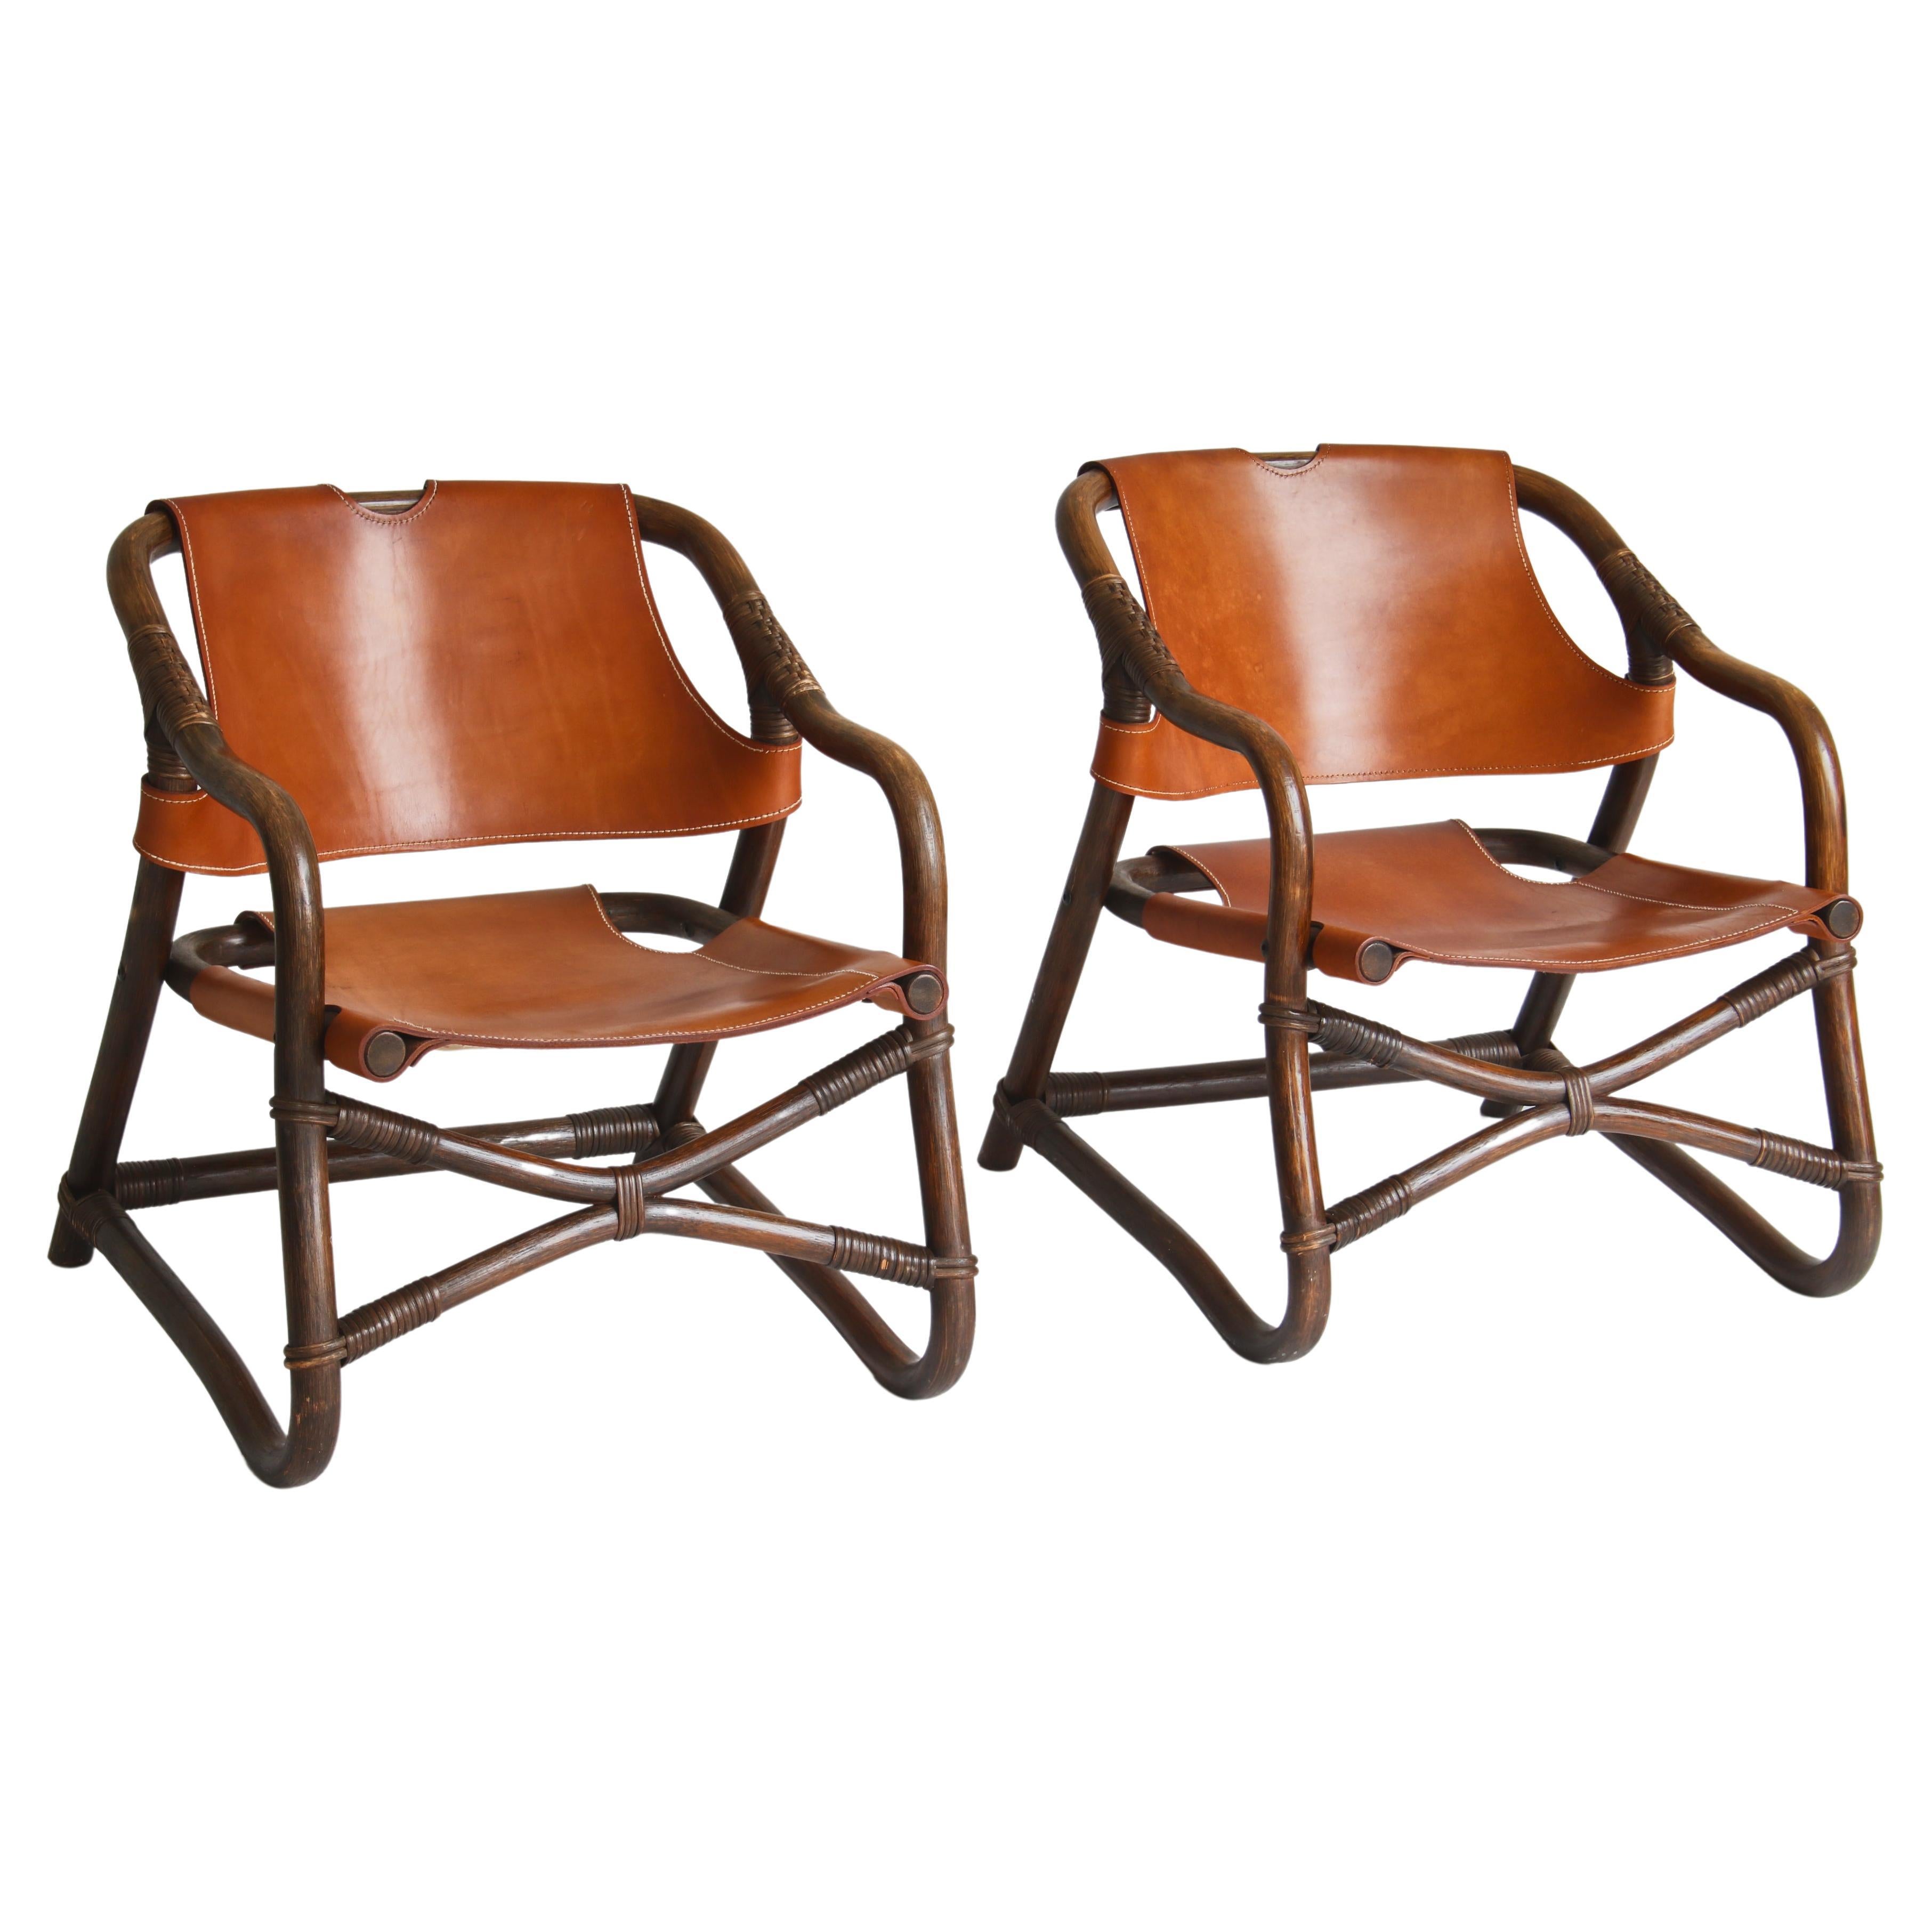 1960s Danish Modern "Manilla" Lounge Chairs in Stained Bamboo and Saddle Leather